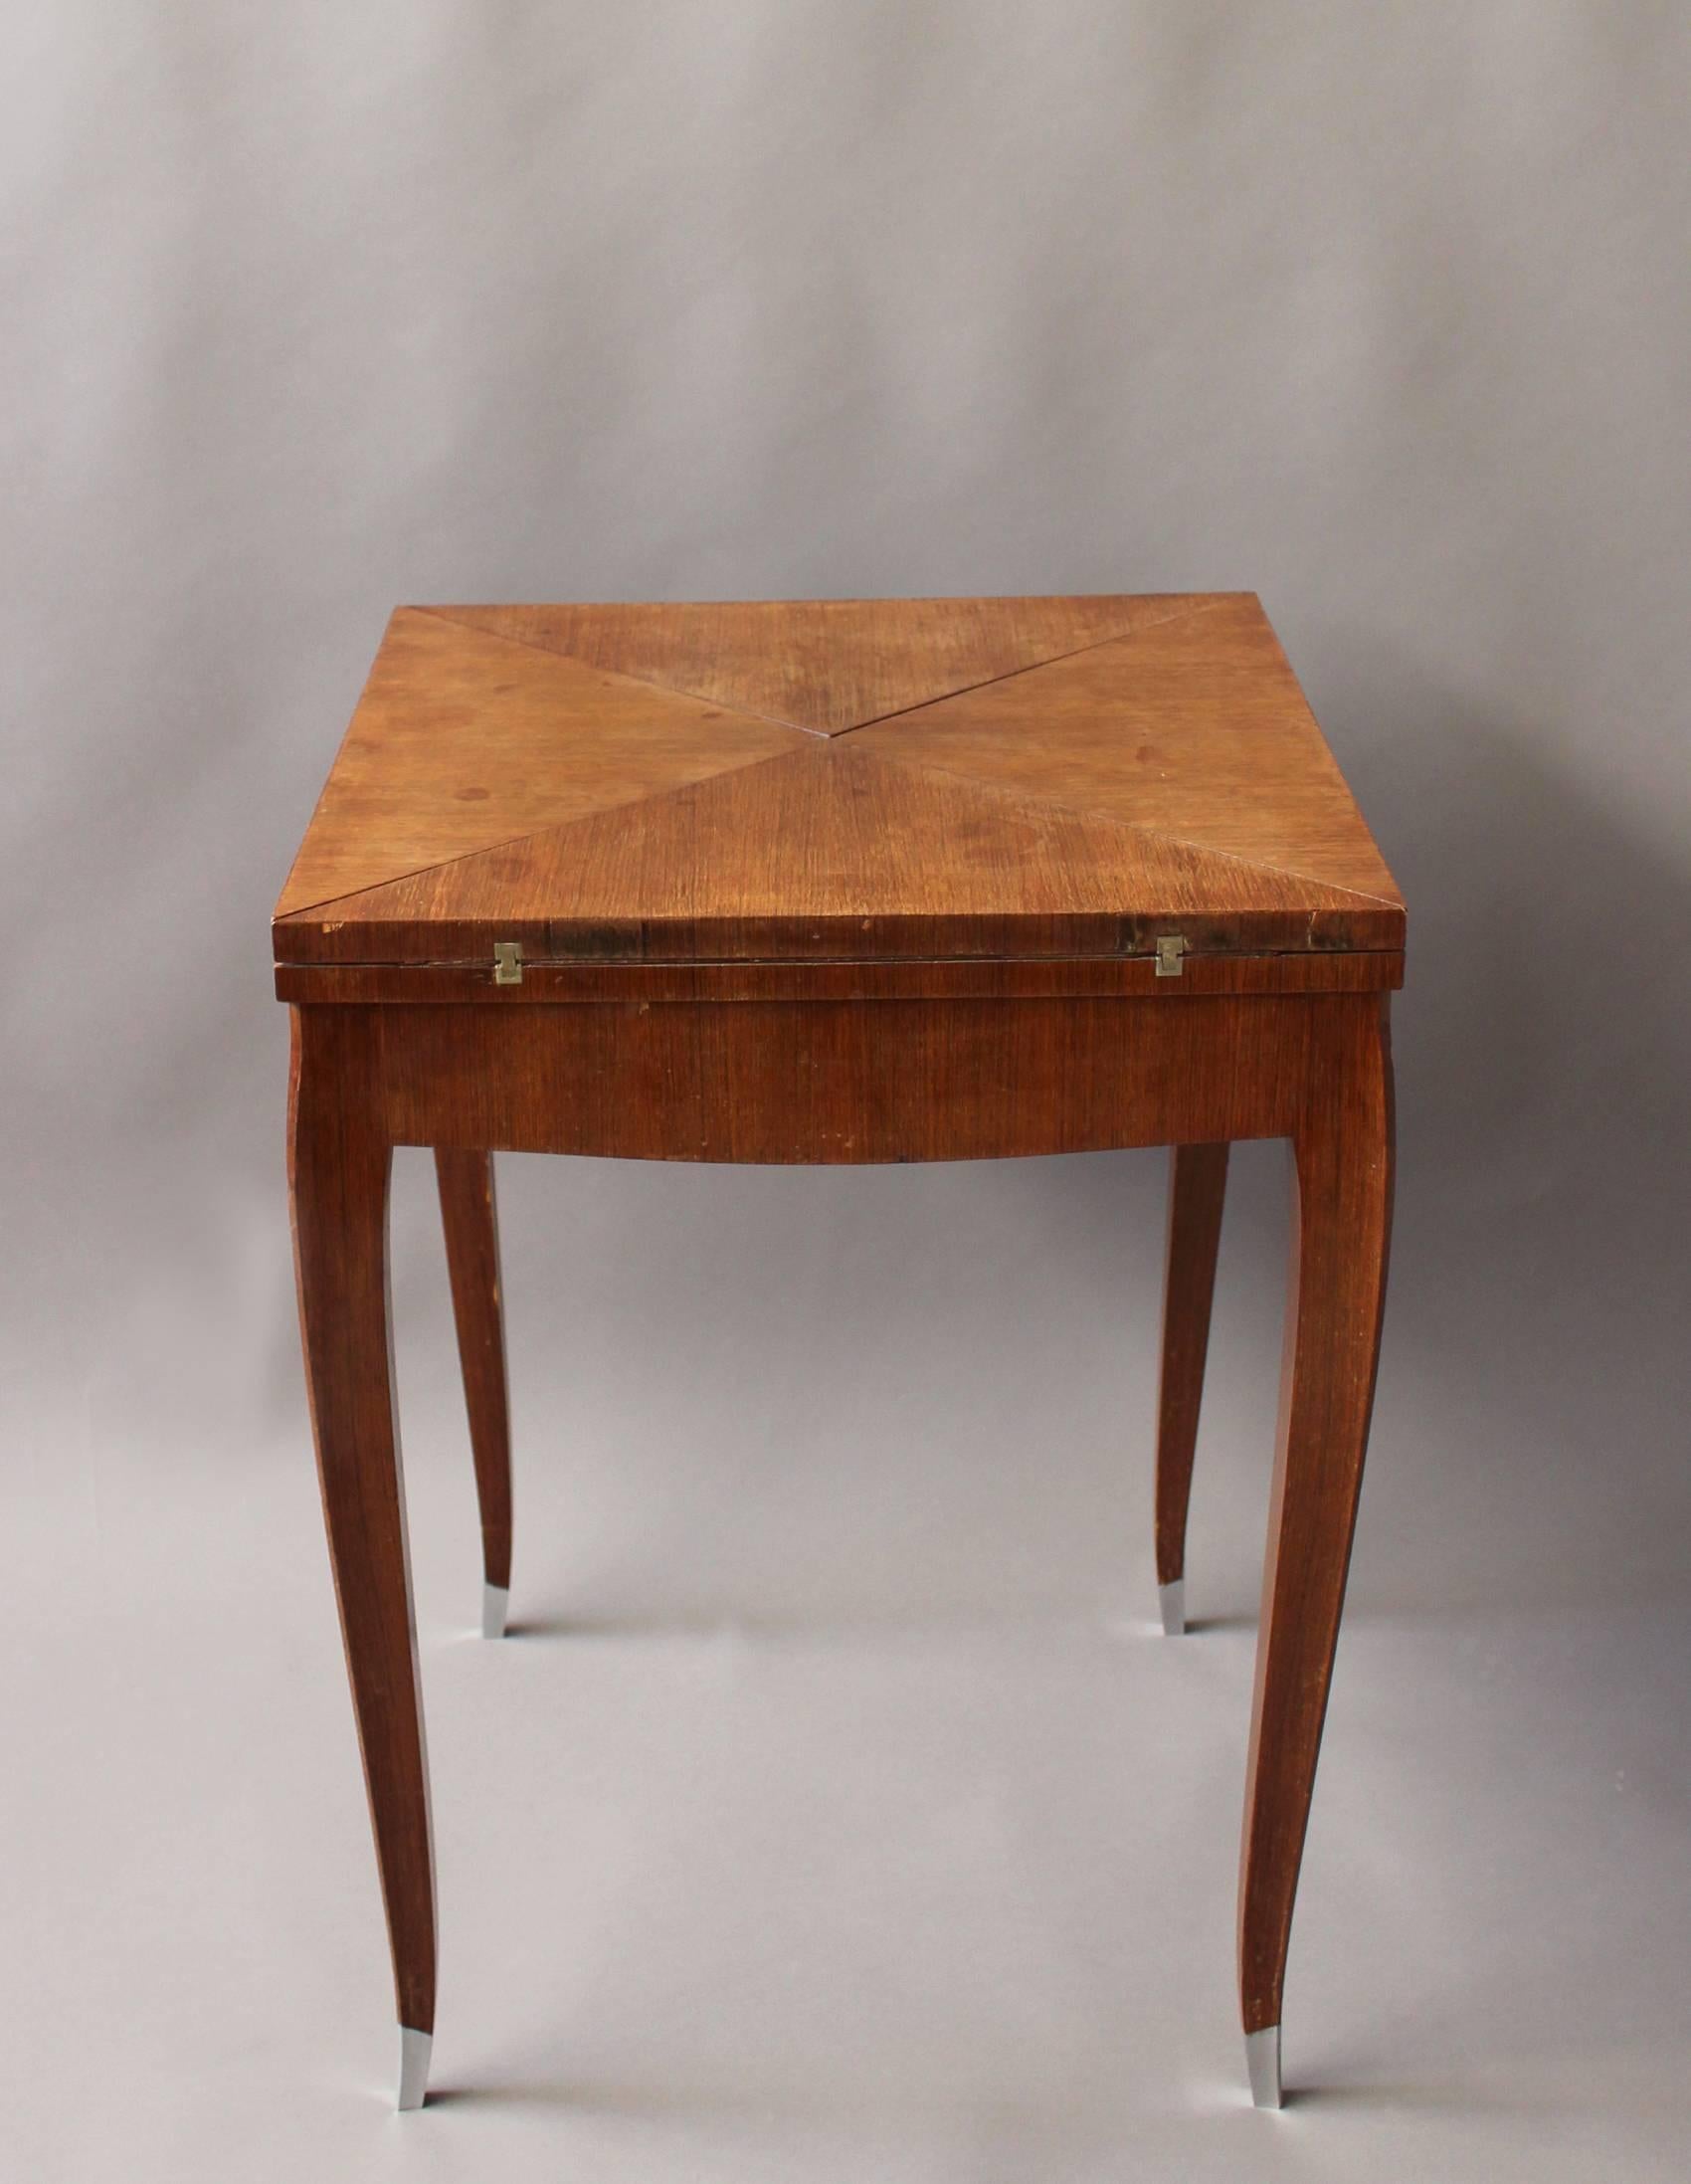 Fine French Art Deco rosewood envelope game/side table.
The top opened as an envelope to be used as a game table.
Four curved legs with silver plated sabots.
Very elegant.
Dimensions of the table opened is H 29.33  x  W 31  x  D 31 in.